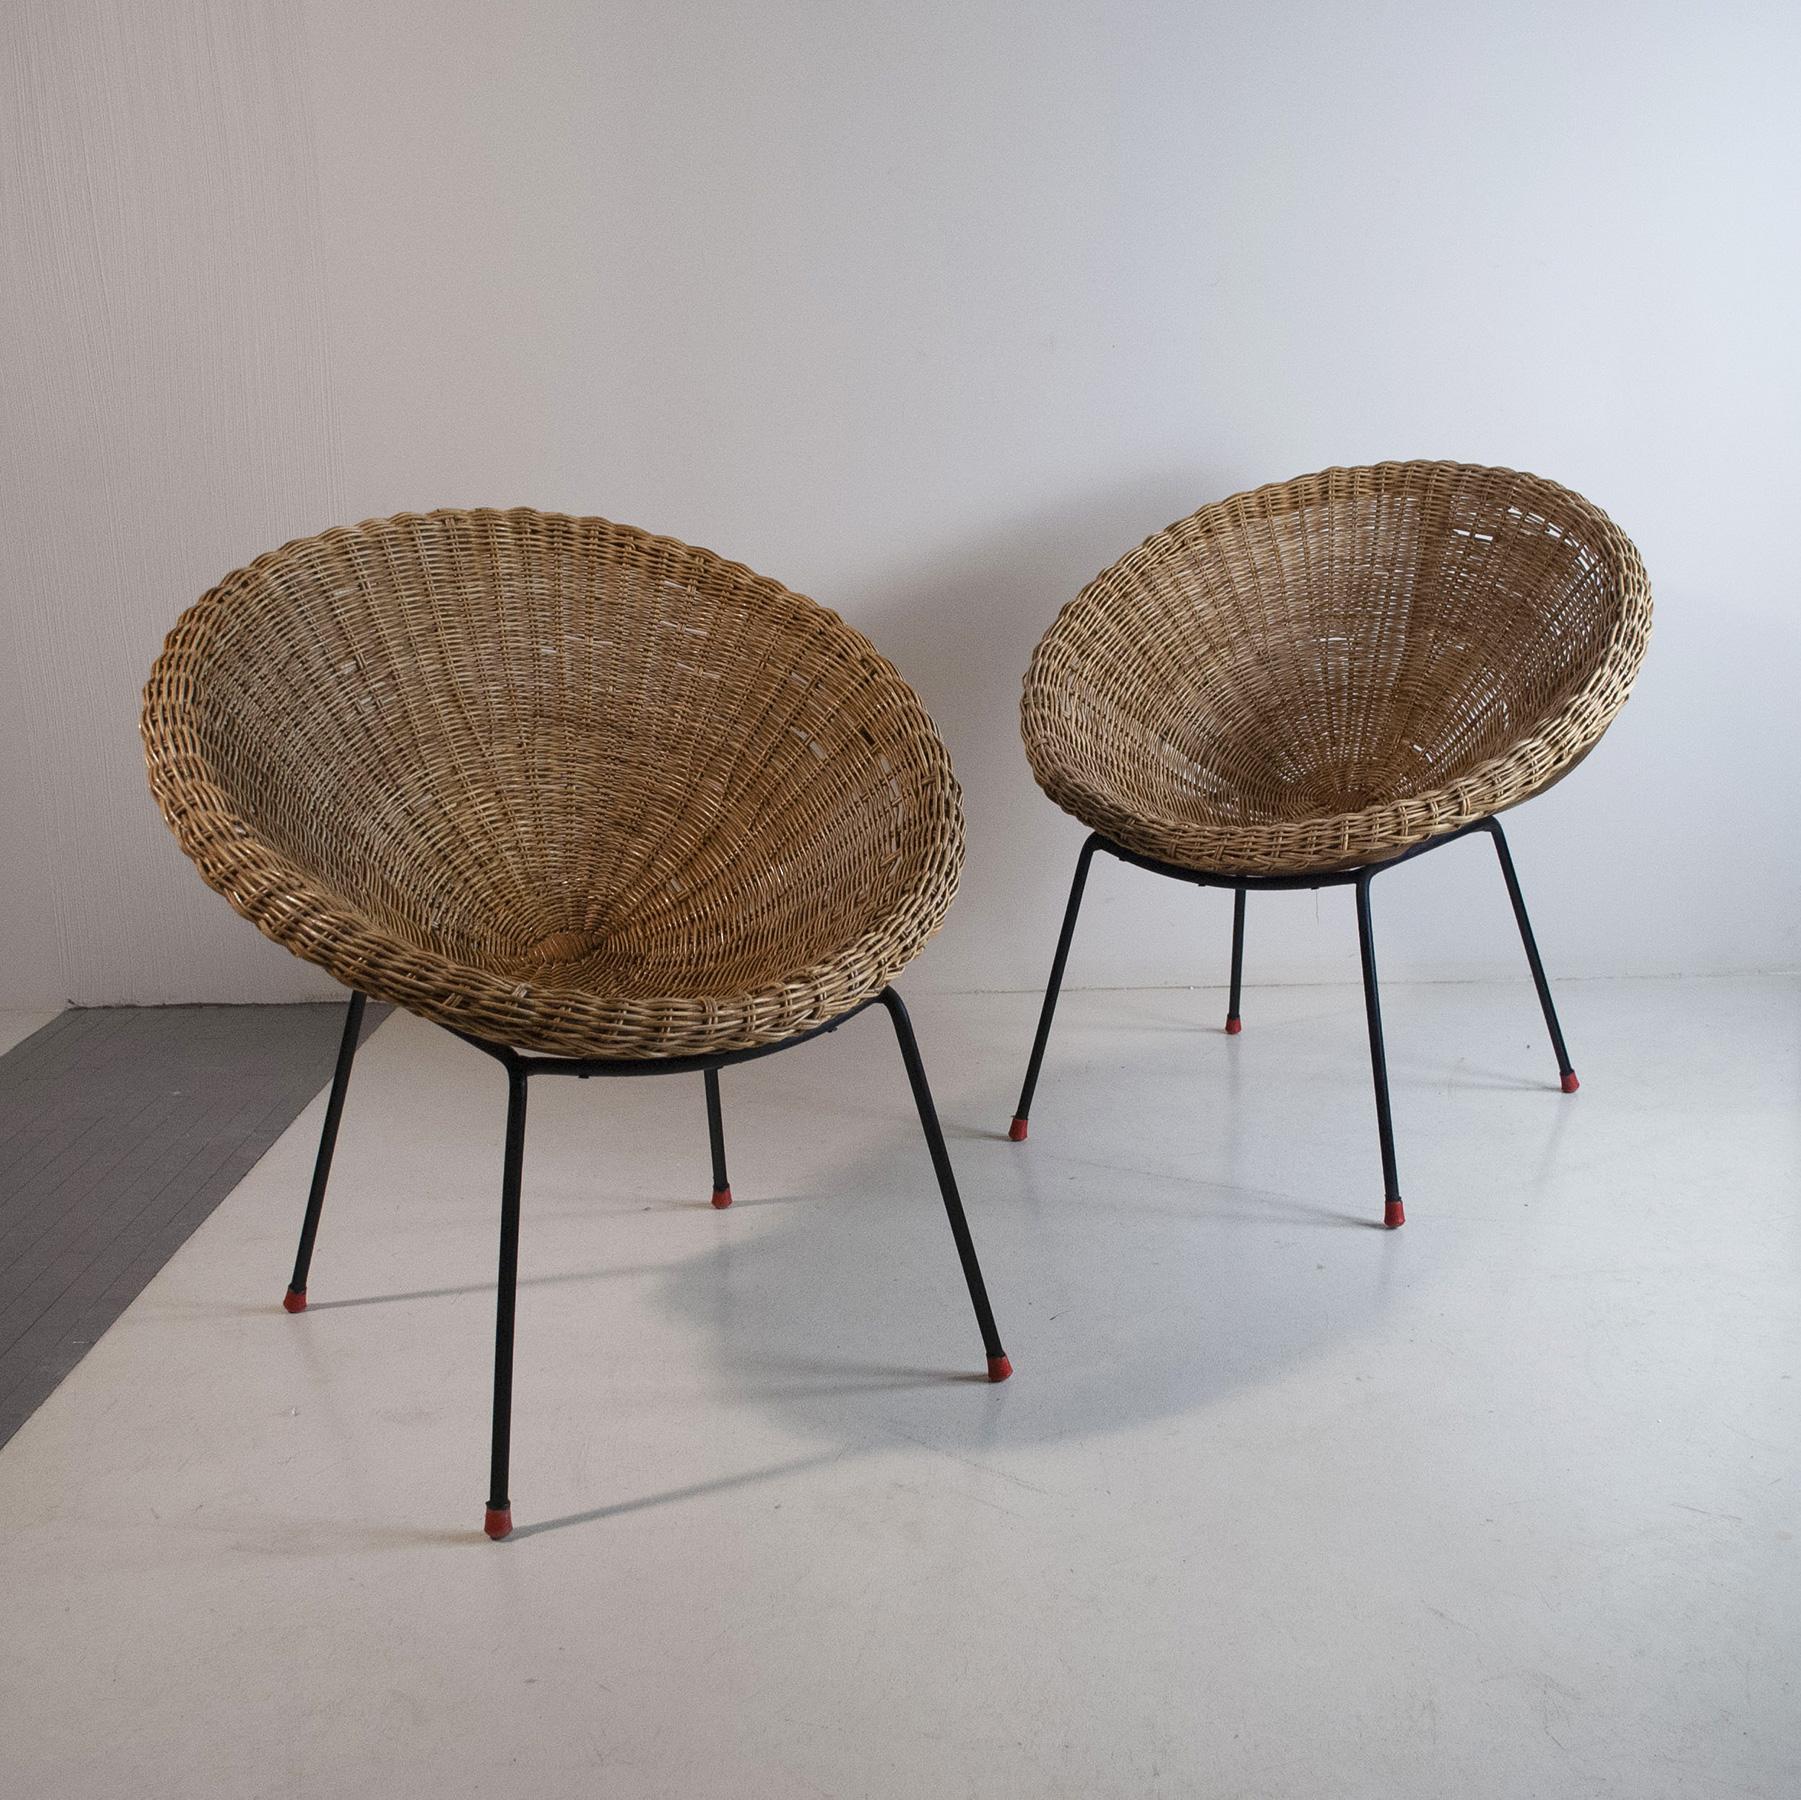 Pair of rattan eggs chairs with iron structure, Italian production from the 1960s.